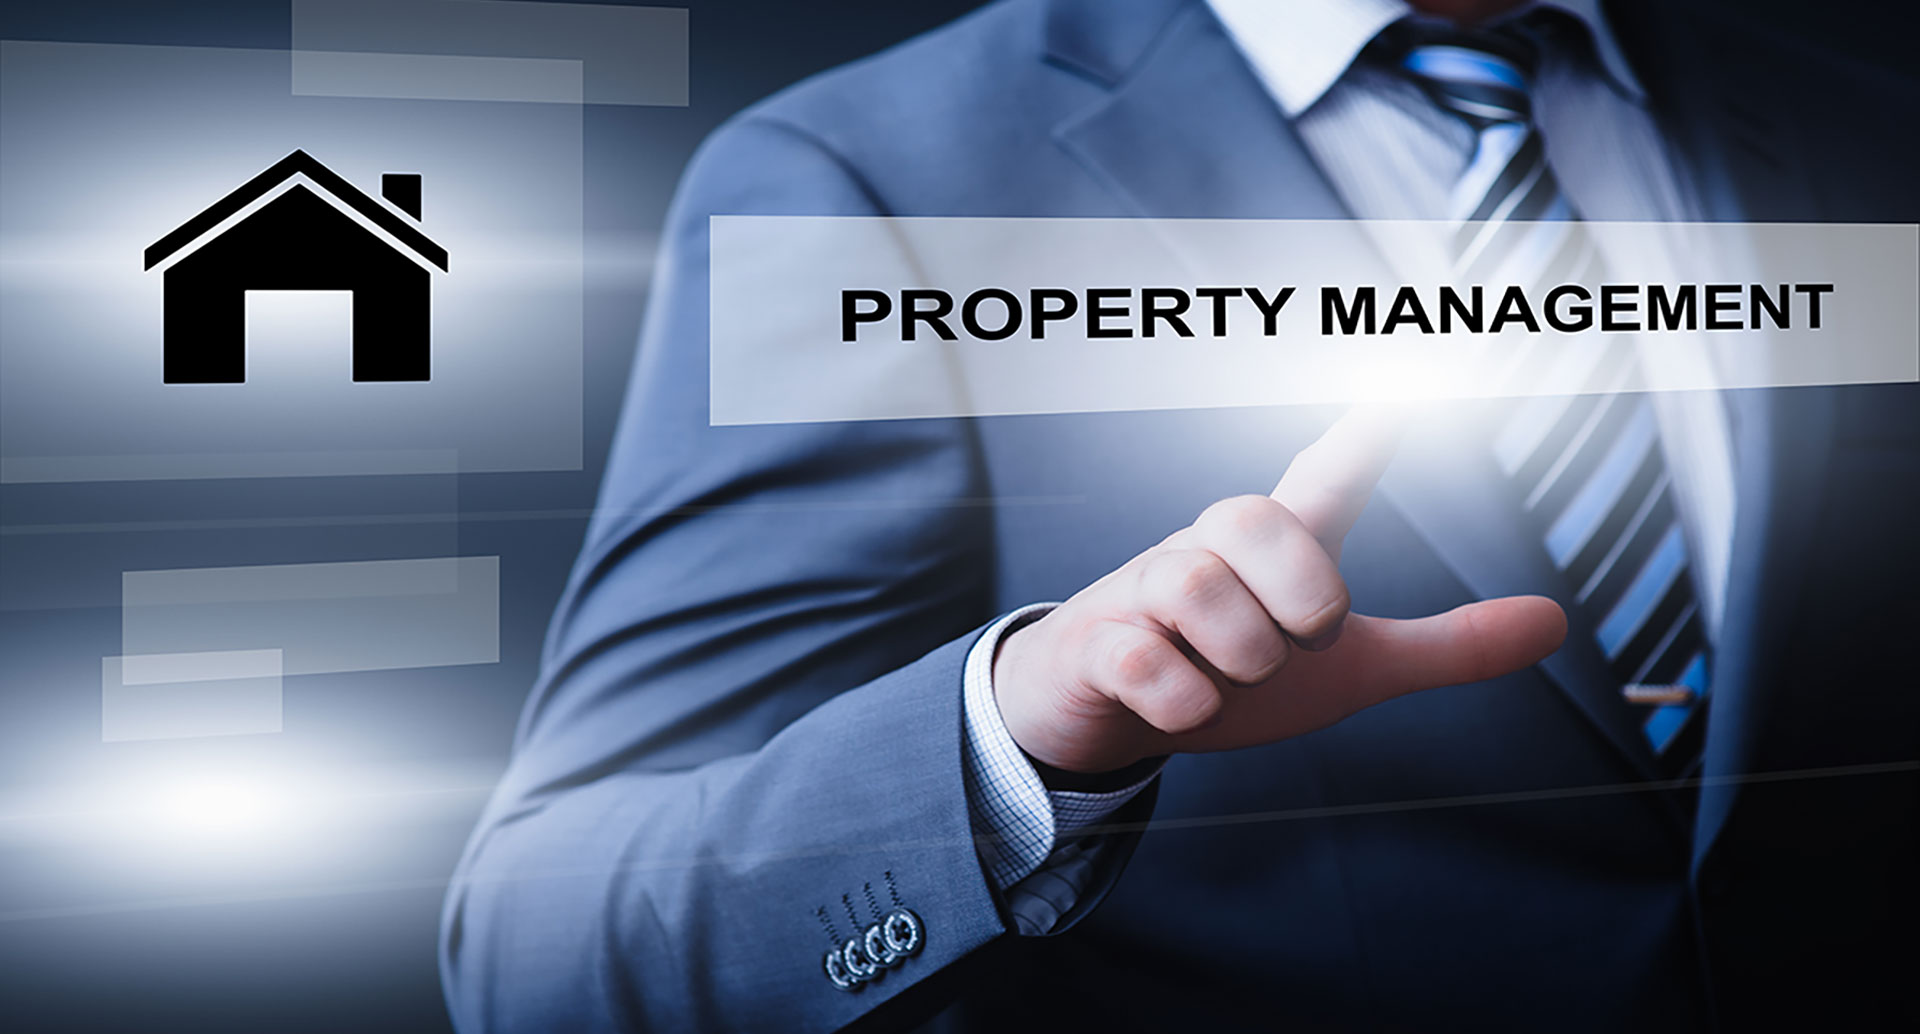 The Property Management Blueprint Building a Solid Foundation